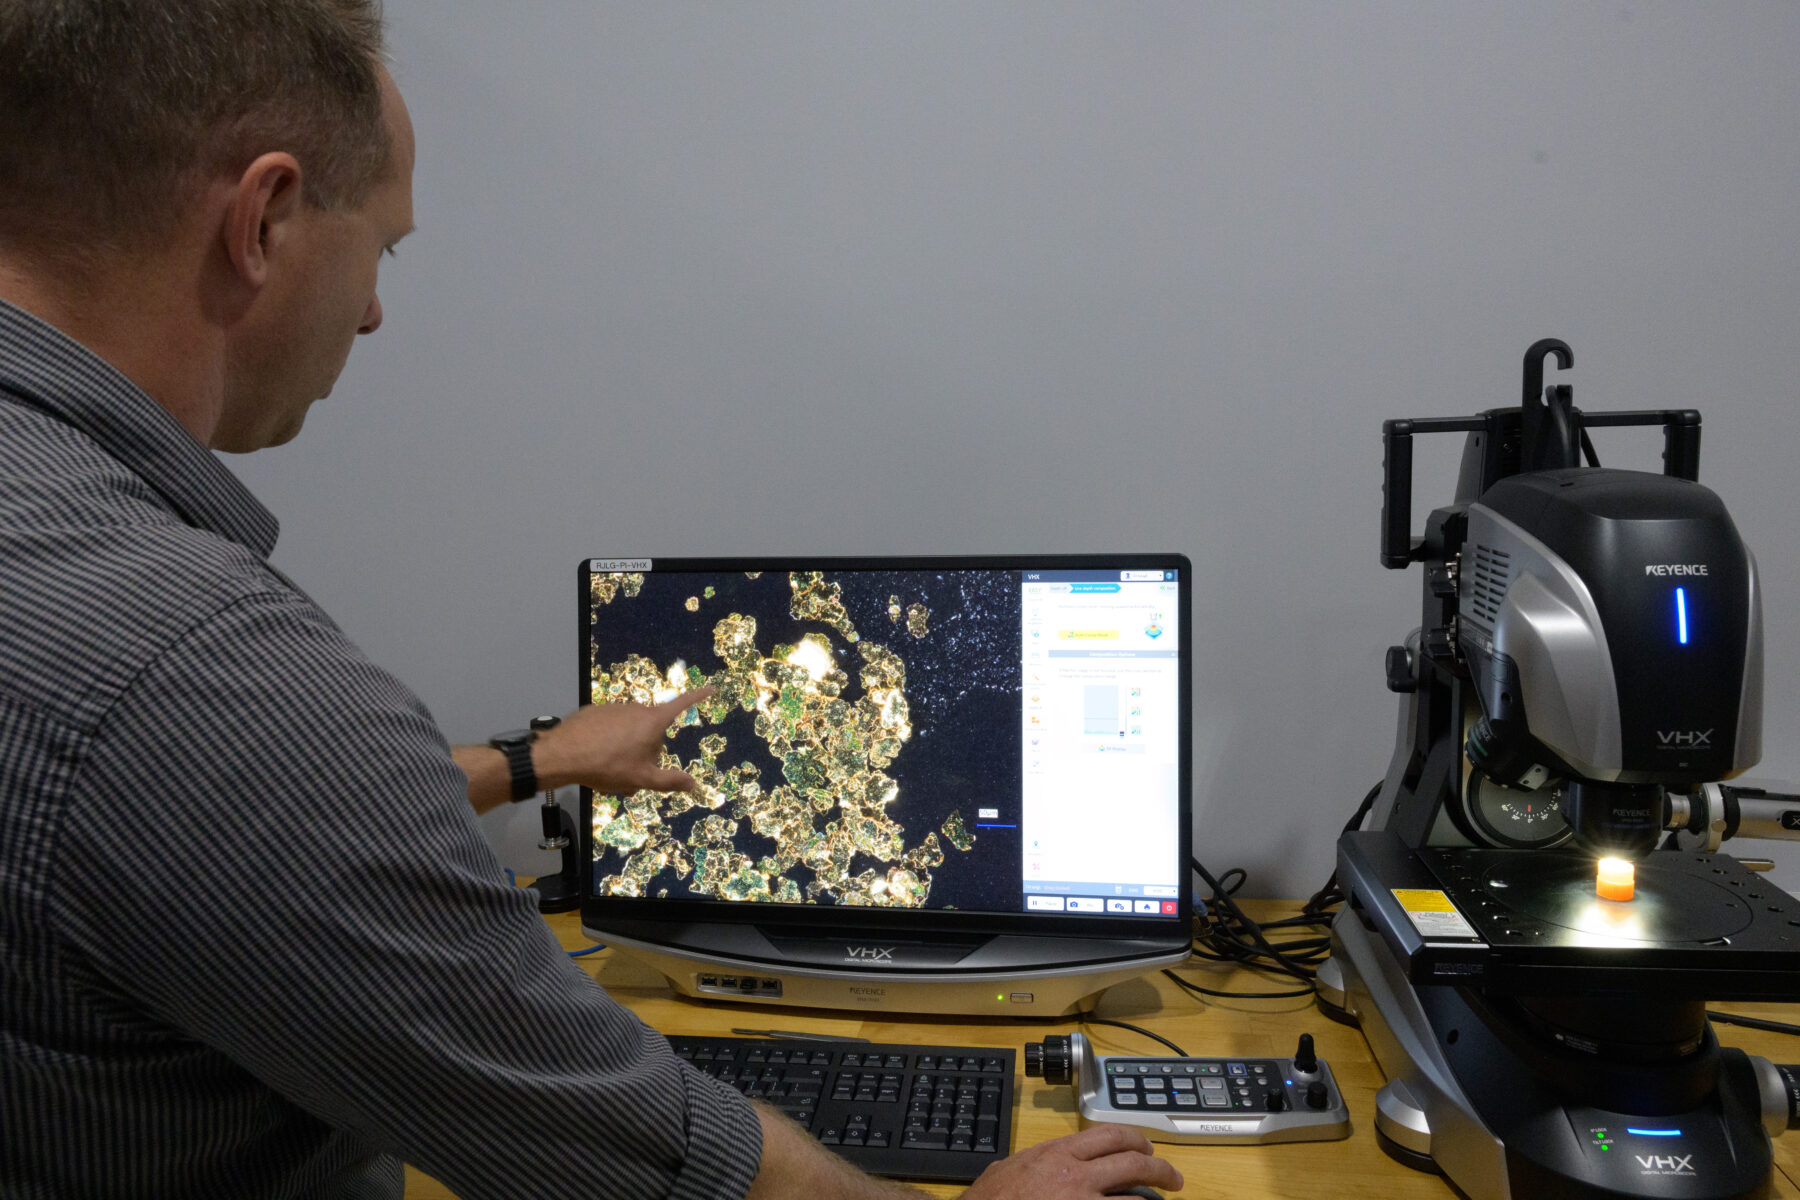 Man conducts further analysis using the digital microscope.